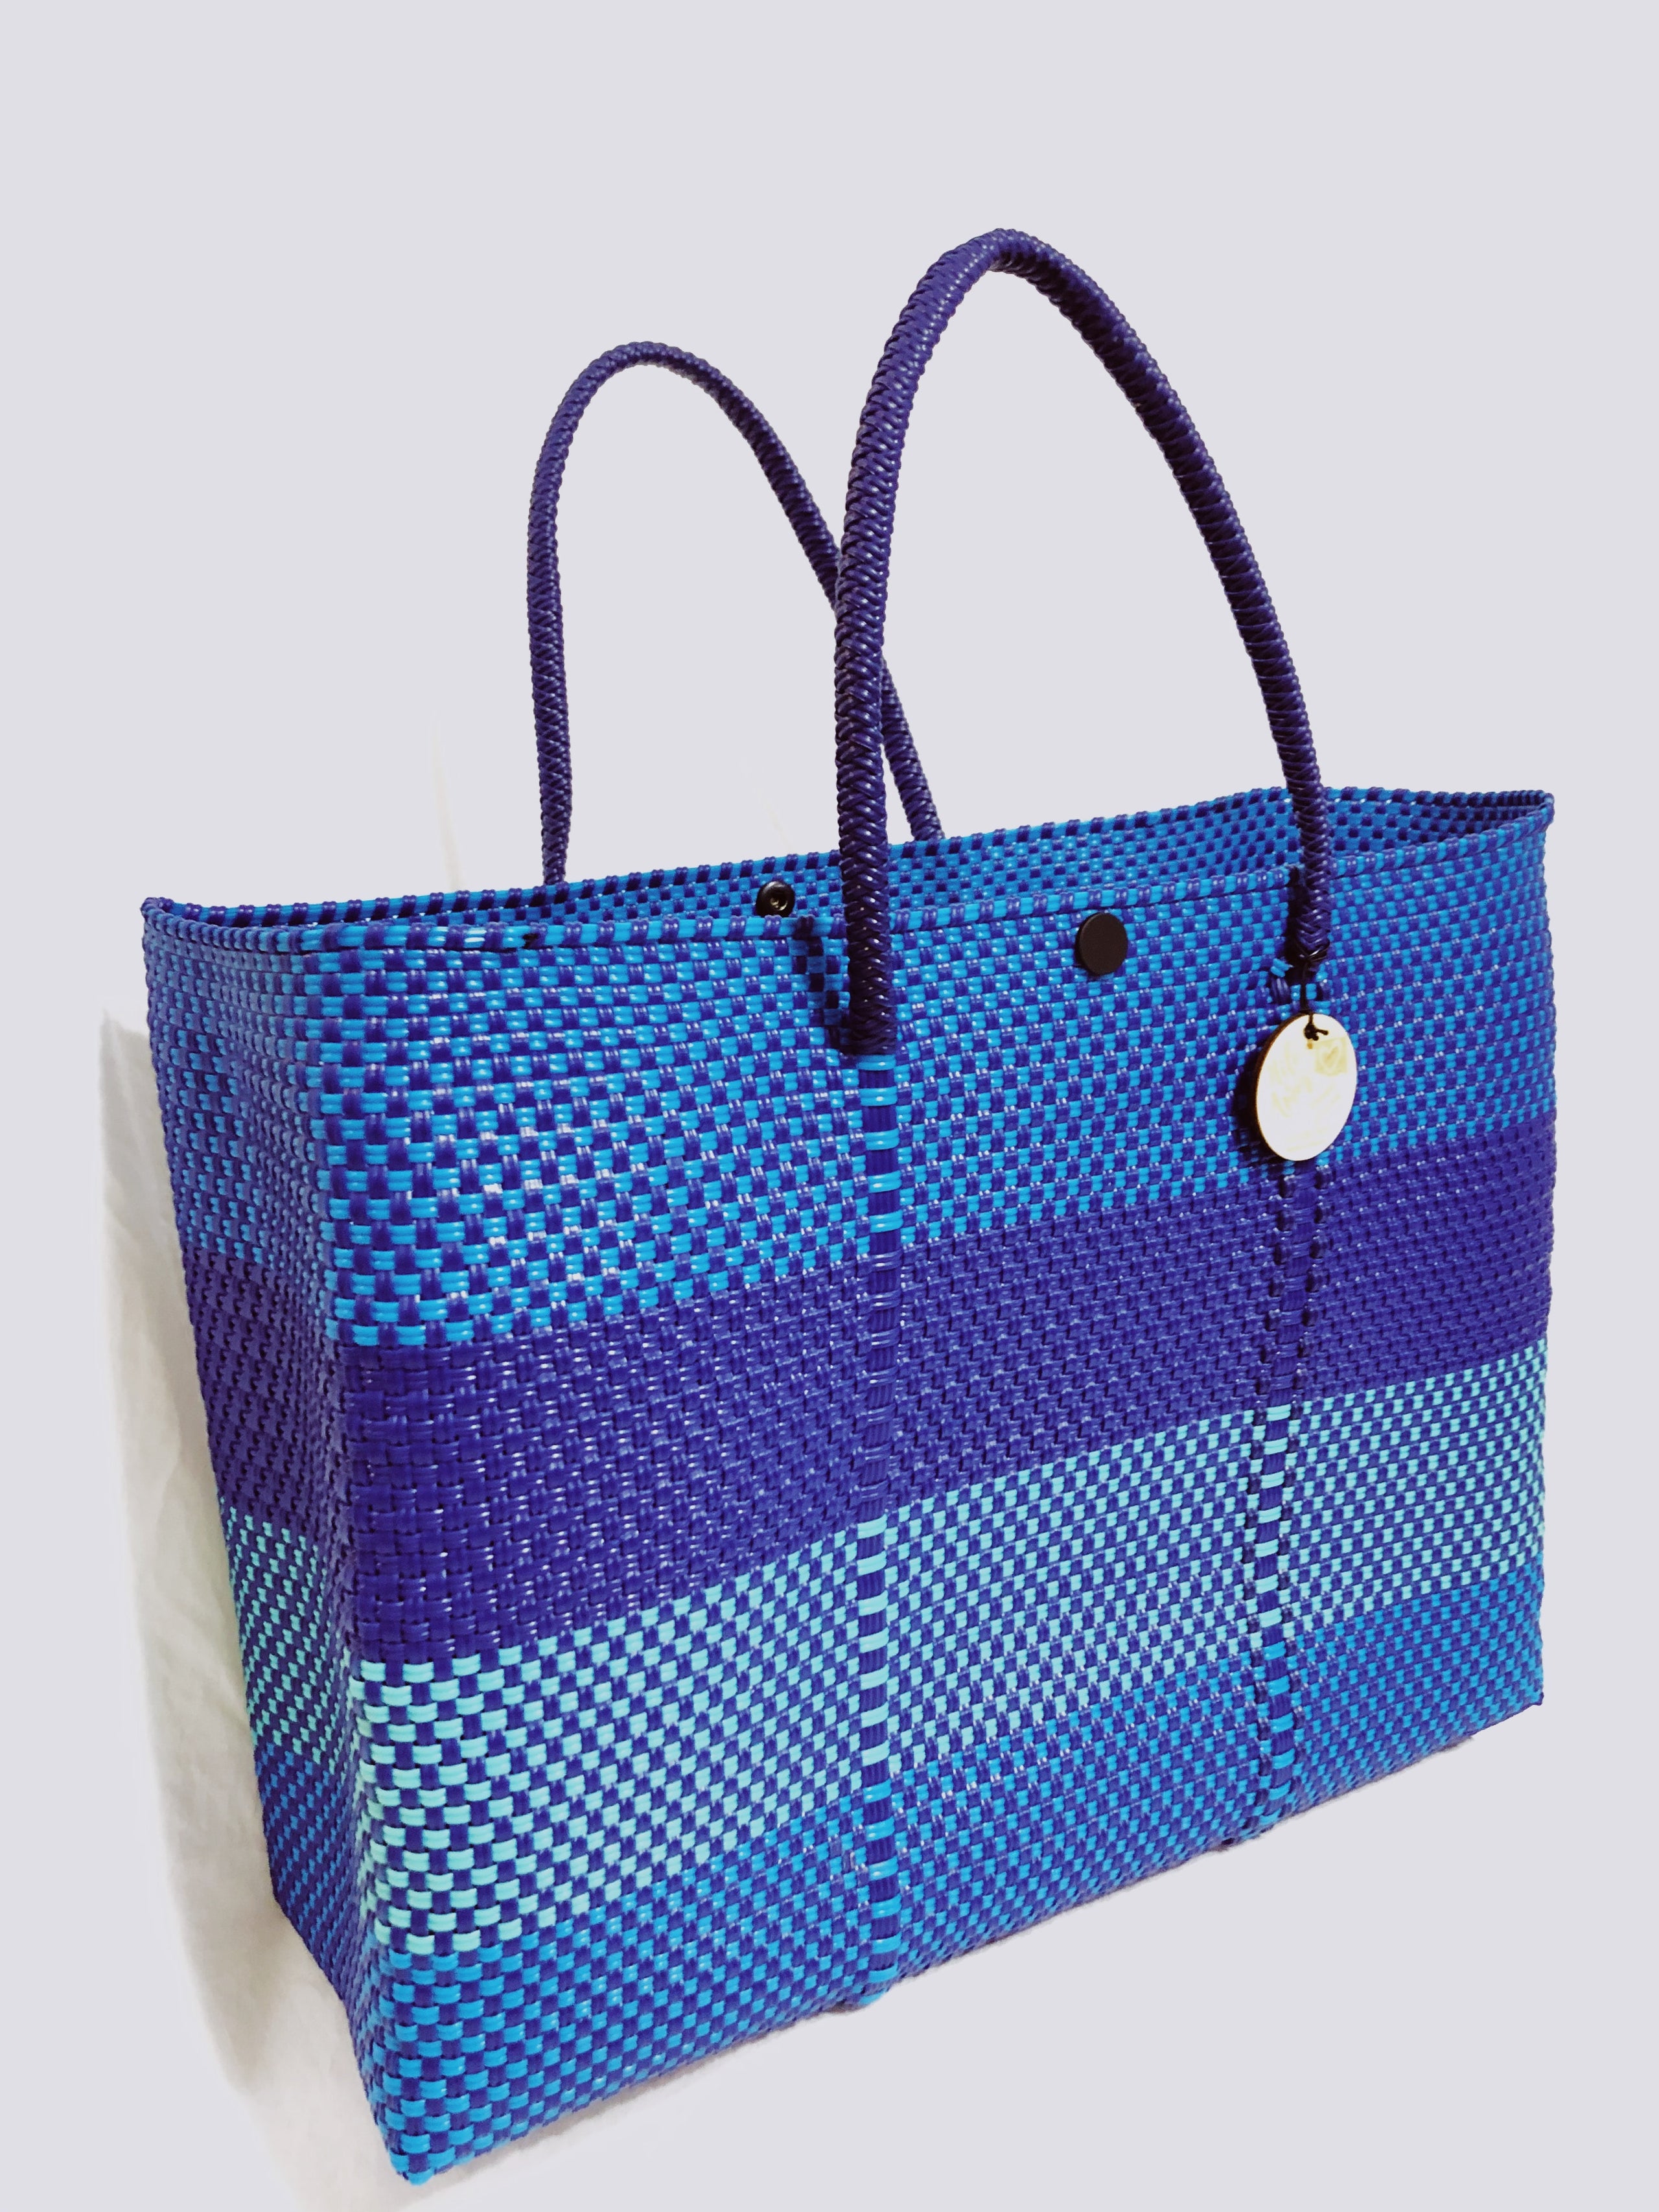 OAXACA STYLE HANDWOVEN RECYCLED PLASTIC TOTE, Summer Bag, Beach Bag,  Mexican Bag